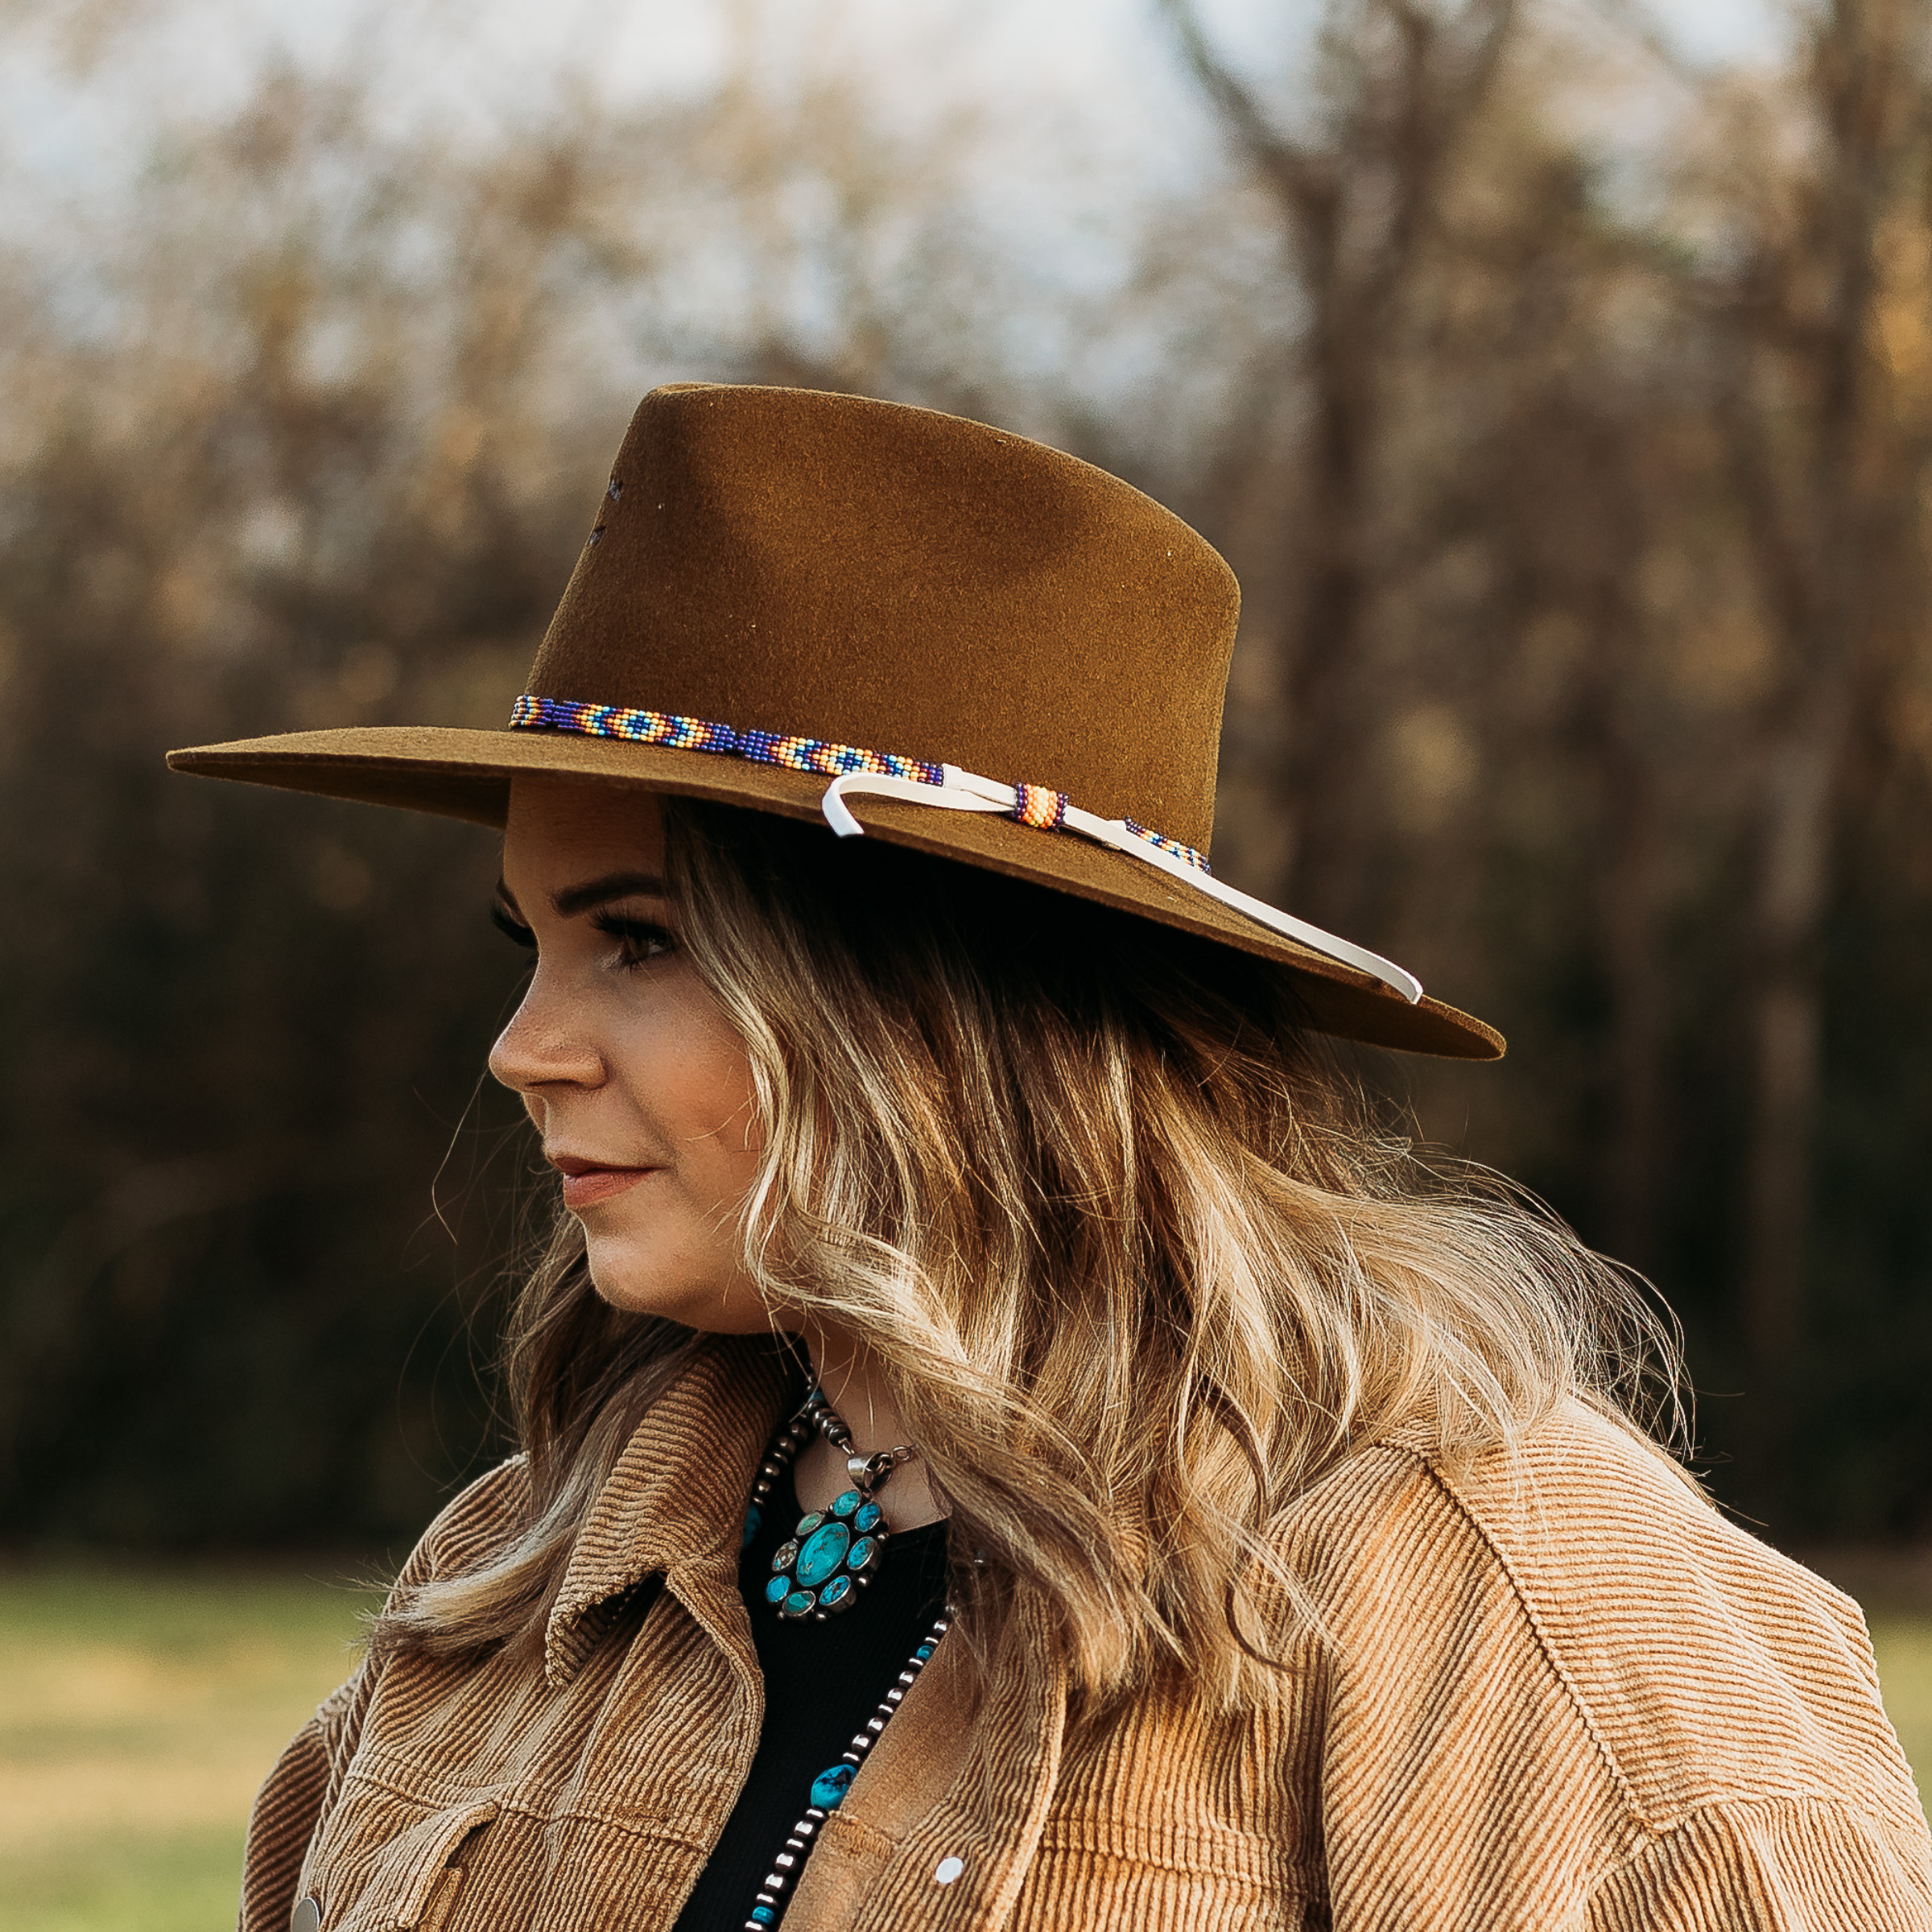 Tan felt hat with a Aztec beaded band. Model has it paired with a brown jacket and turquoise jewelry. Pictured on wooded background.